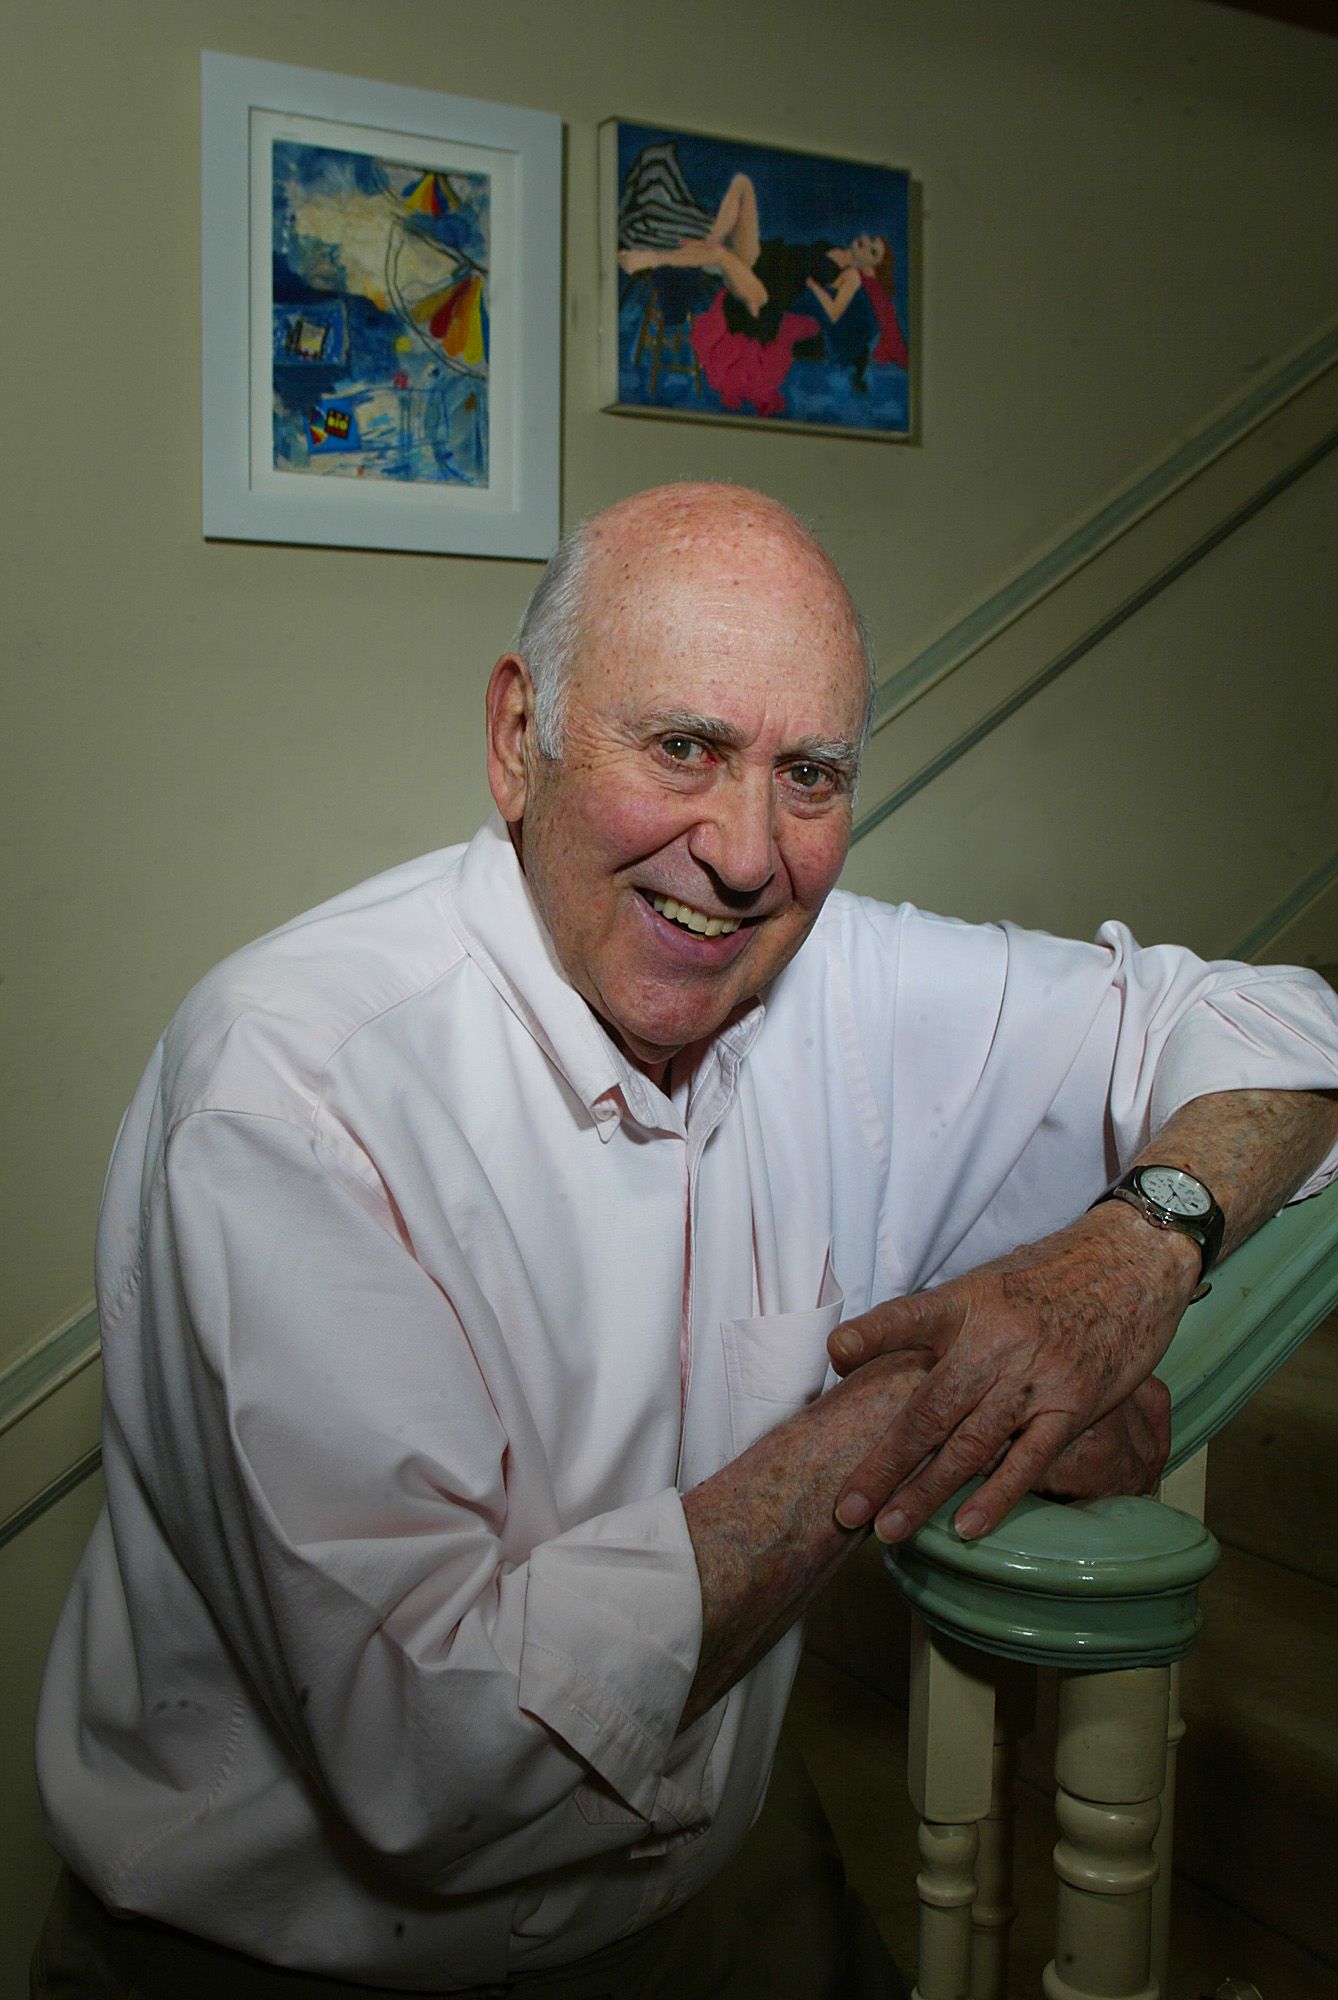 Late Carl Reiner at his Beverly Hills home, Beverly Hills, California April 25, 2003 | Photo: Getty Images